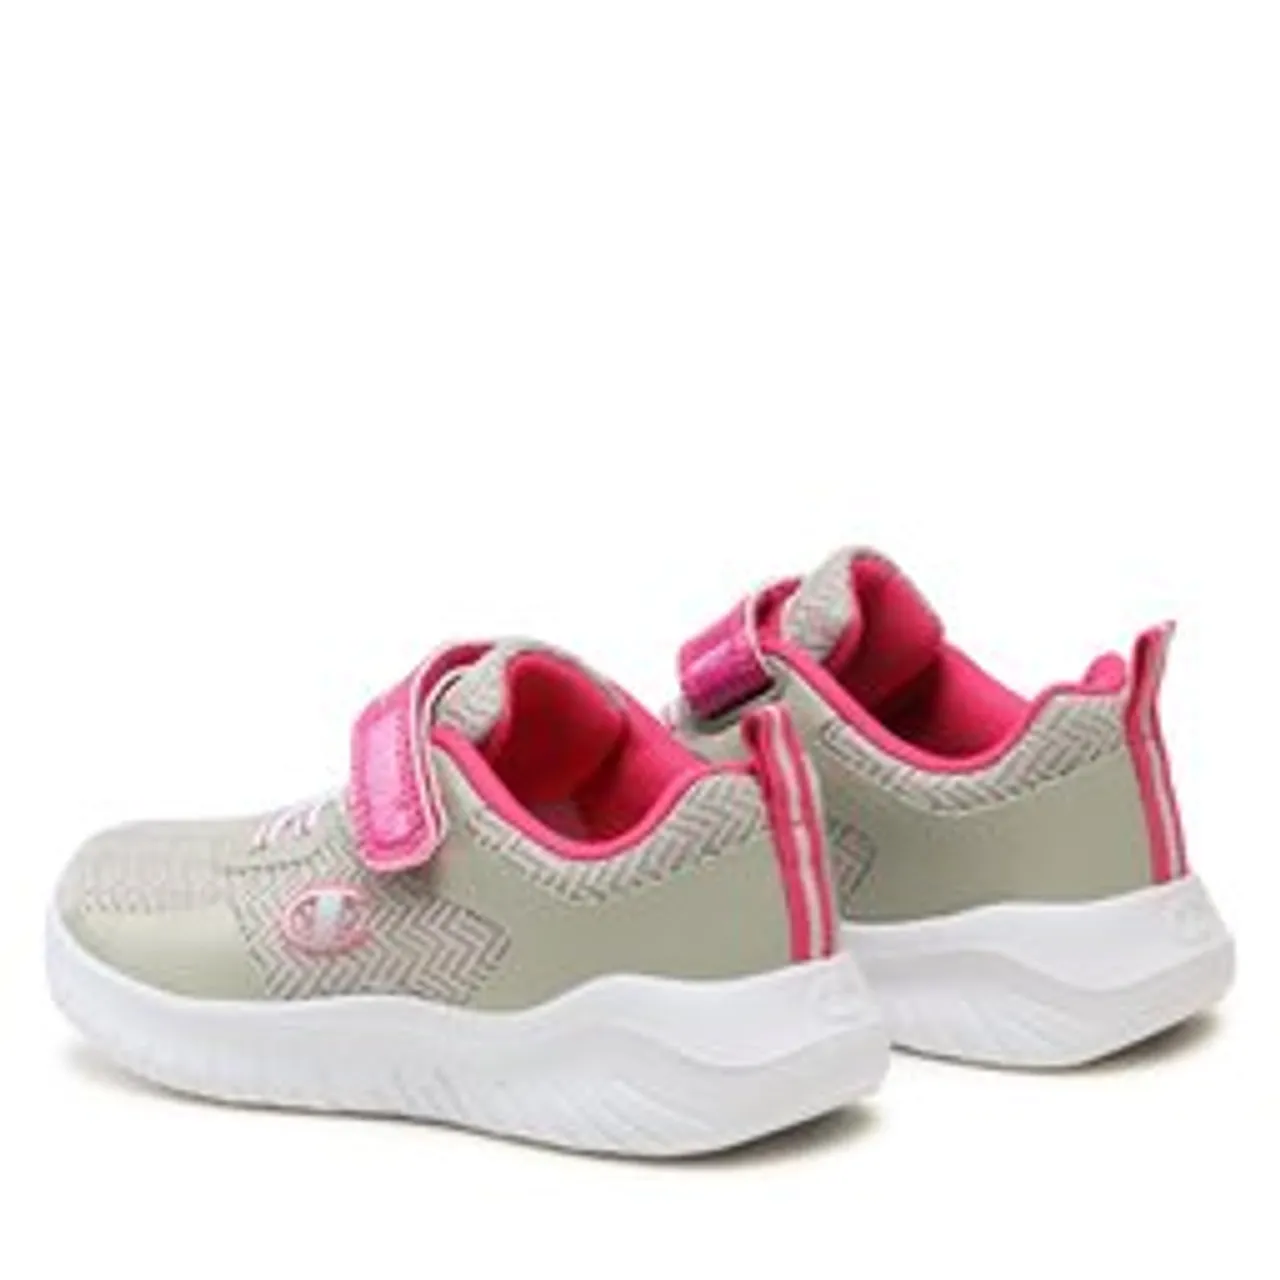 Sneakers Champion Softy Evolve G Ps Low Cut Shoe S32532-ES001 Grey/Fucsia